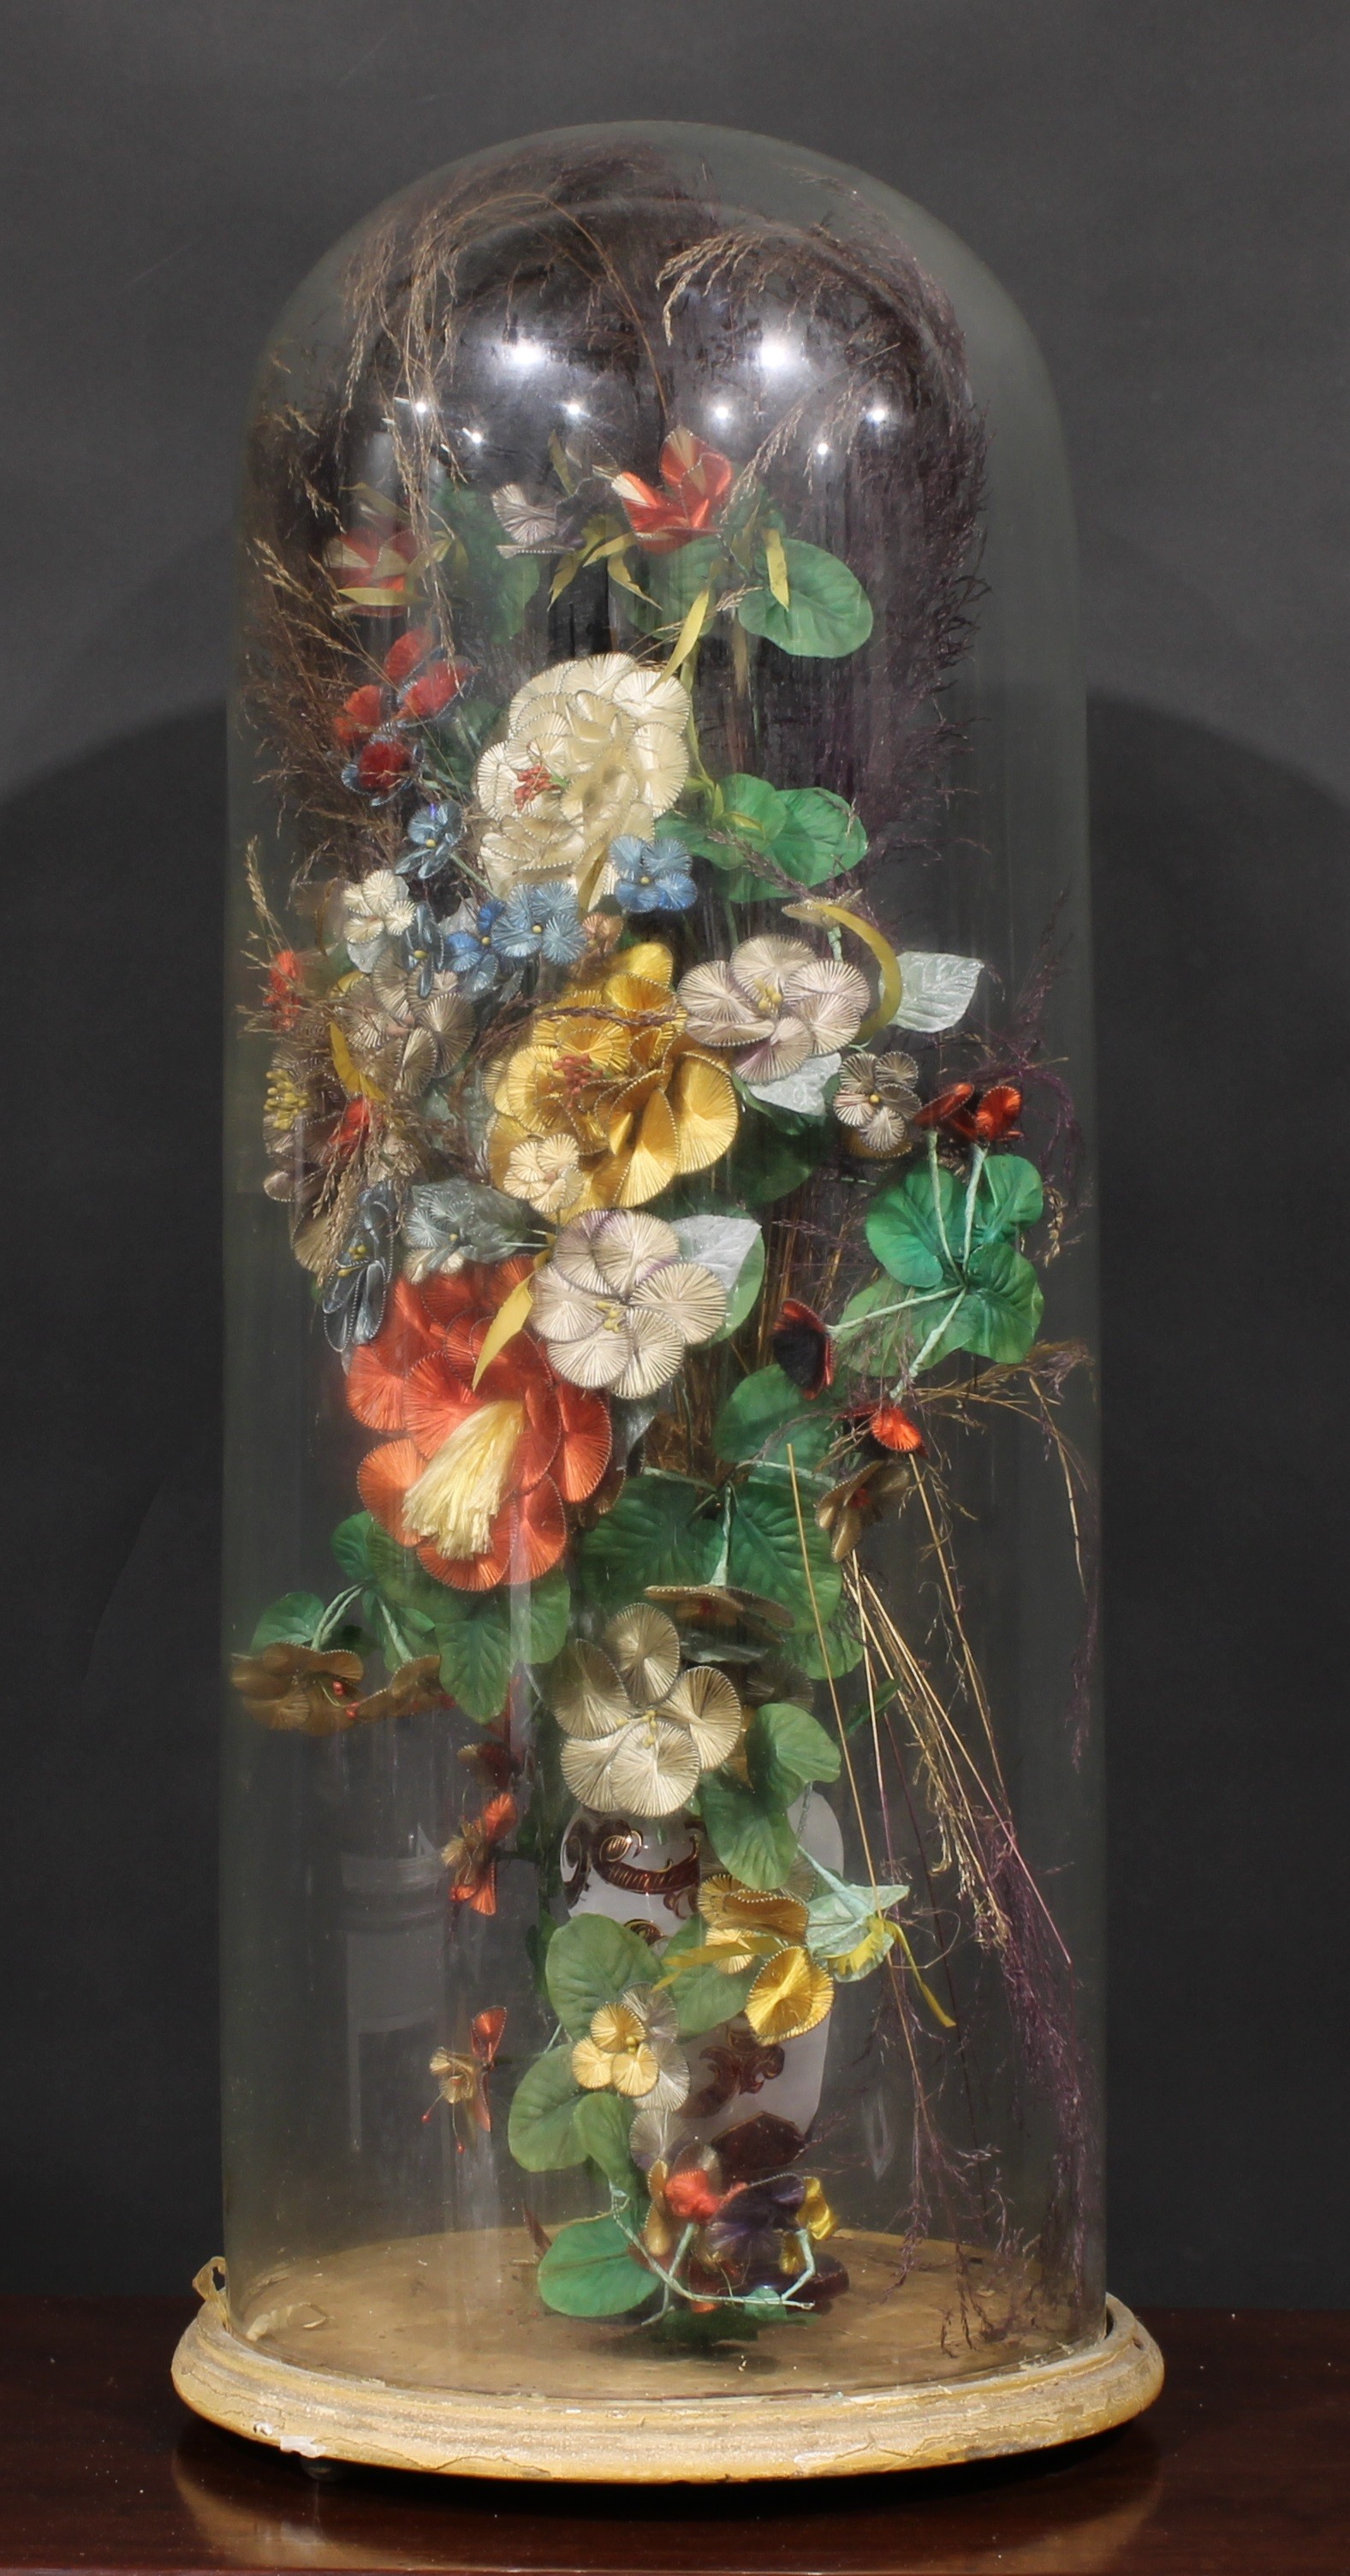 A large Victorian glass dome, enclosing an arrangement of faux flowers, grasses and leaves, in a - Image 2 of 2